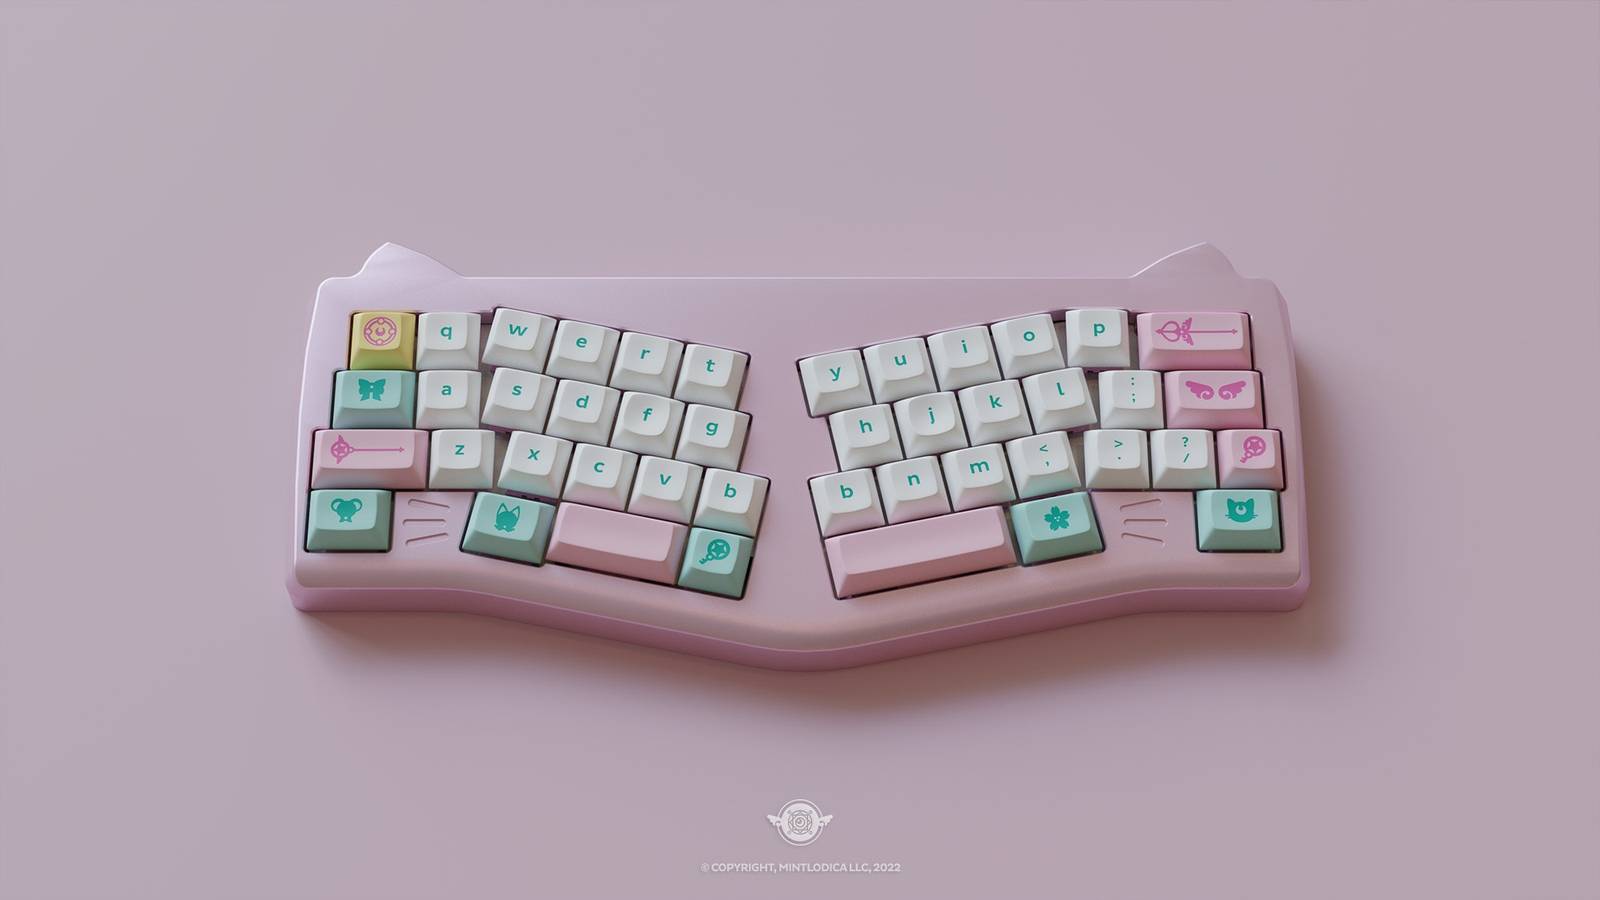 DSA Magic Girl keycaps by Mintlodica in Classic (White, Mint, Pink, Yellow) on a cute anime cat shaped Mechanical Keyboard designed by Hali KB.

